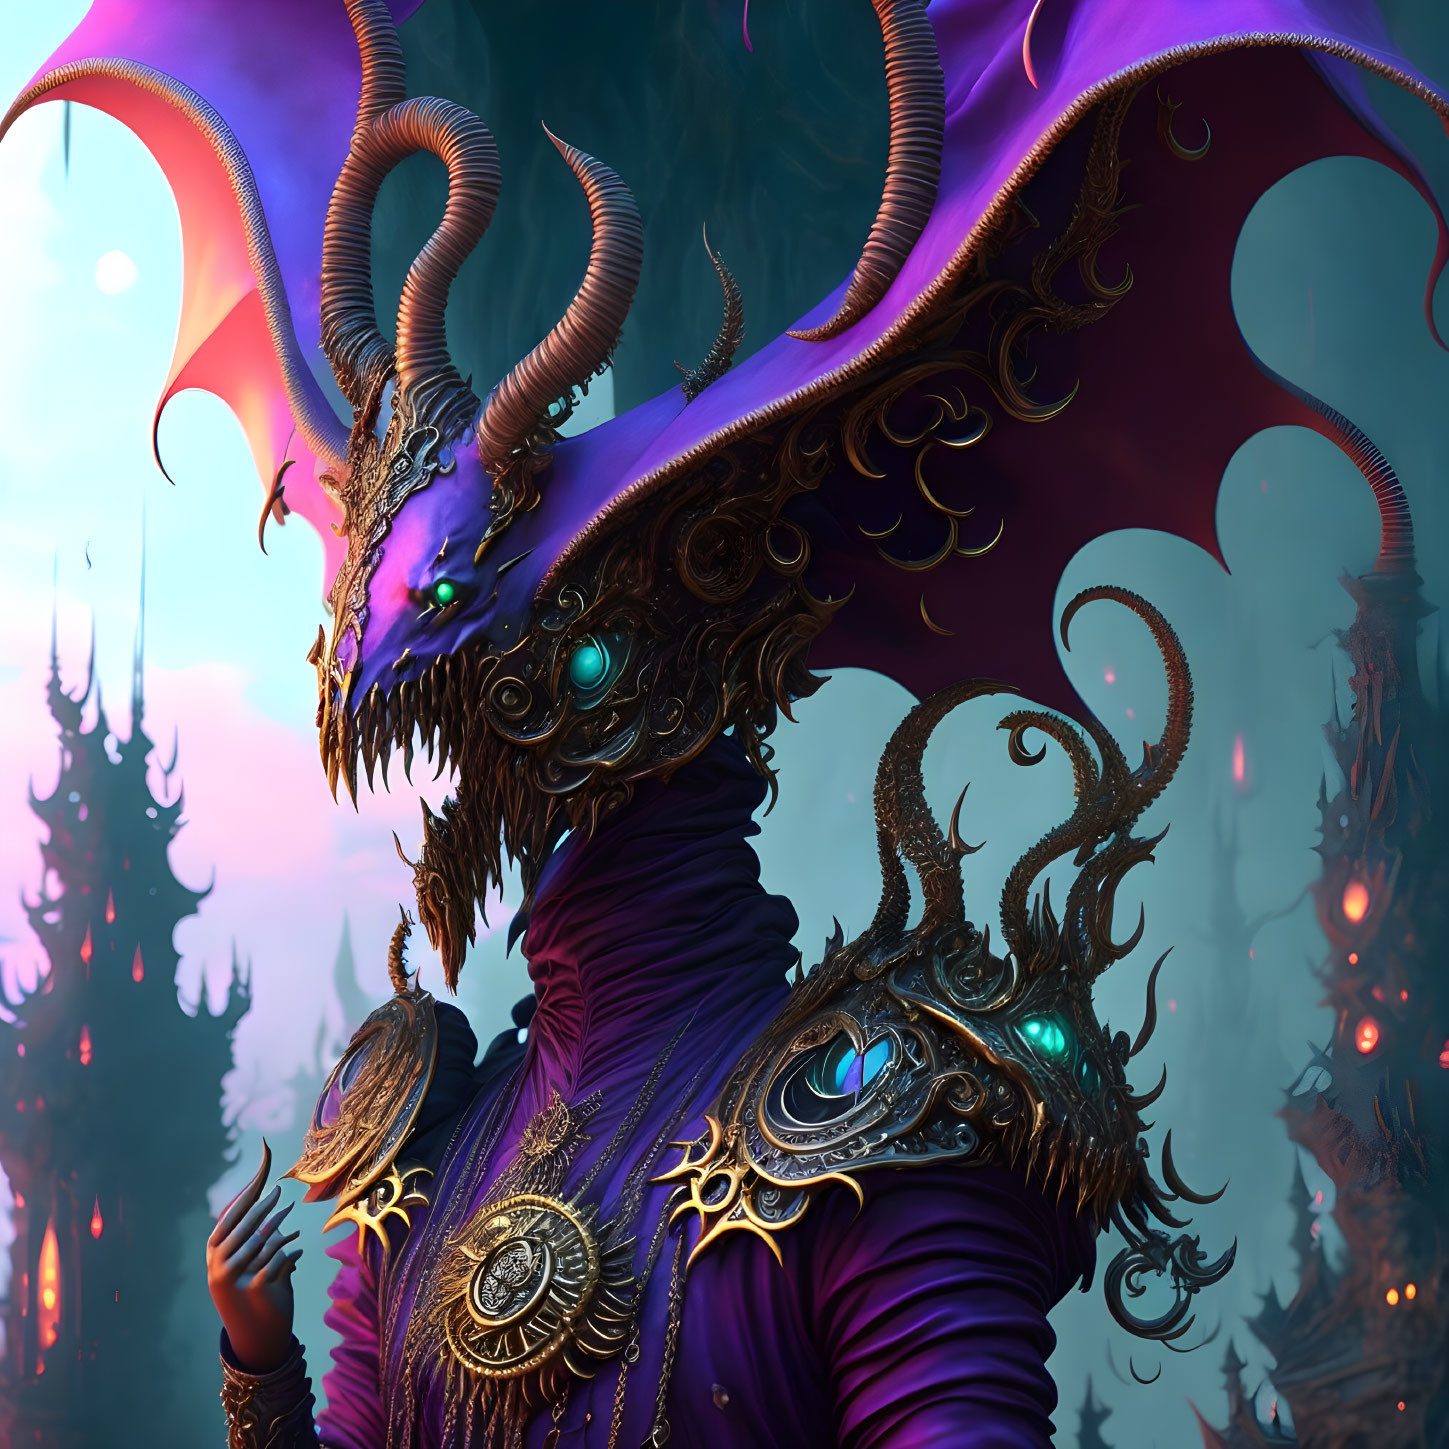 Majestic dragon in golden armor and purple robes in eerie landscape